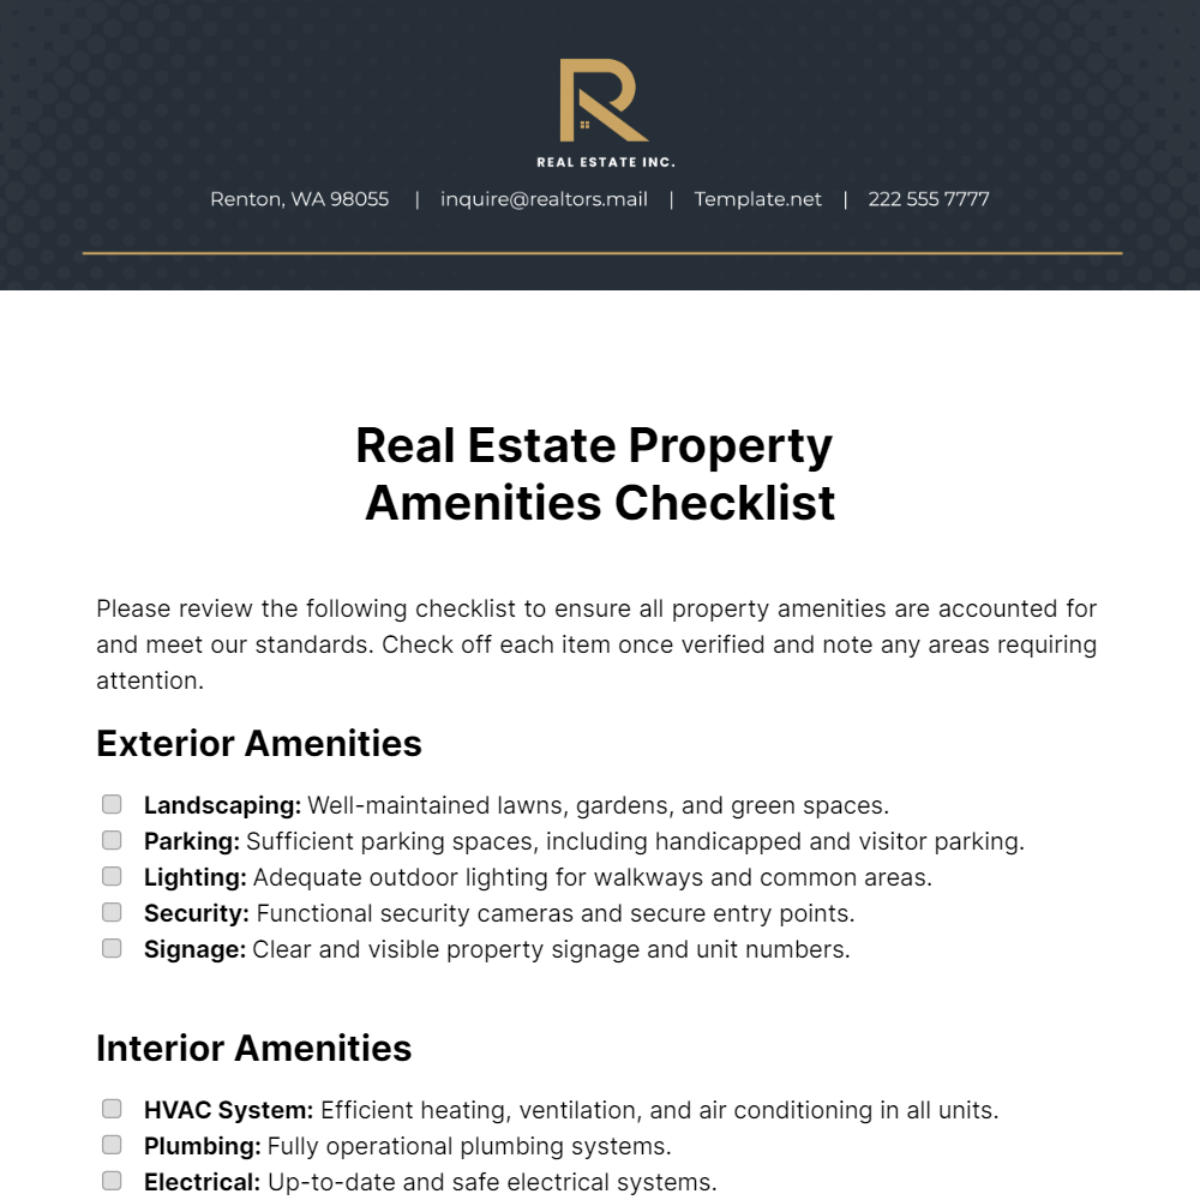 Real Estate Property Amenities Checklist Template